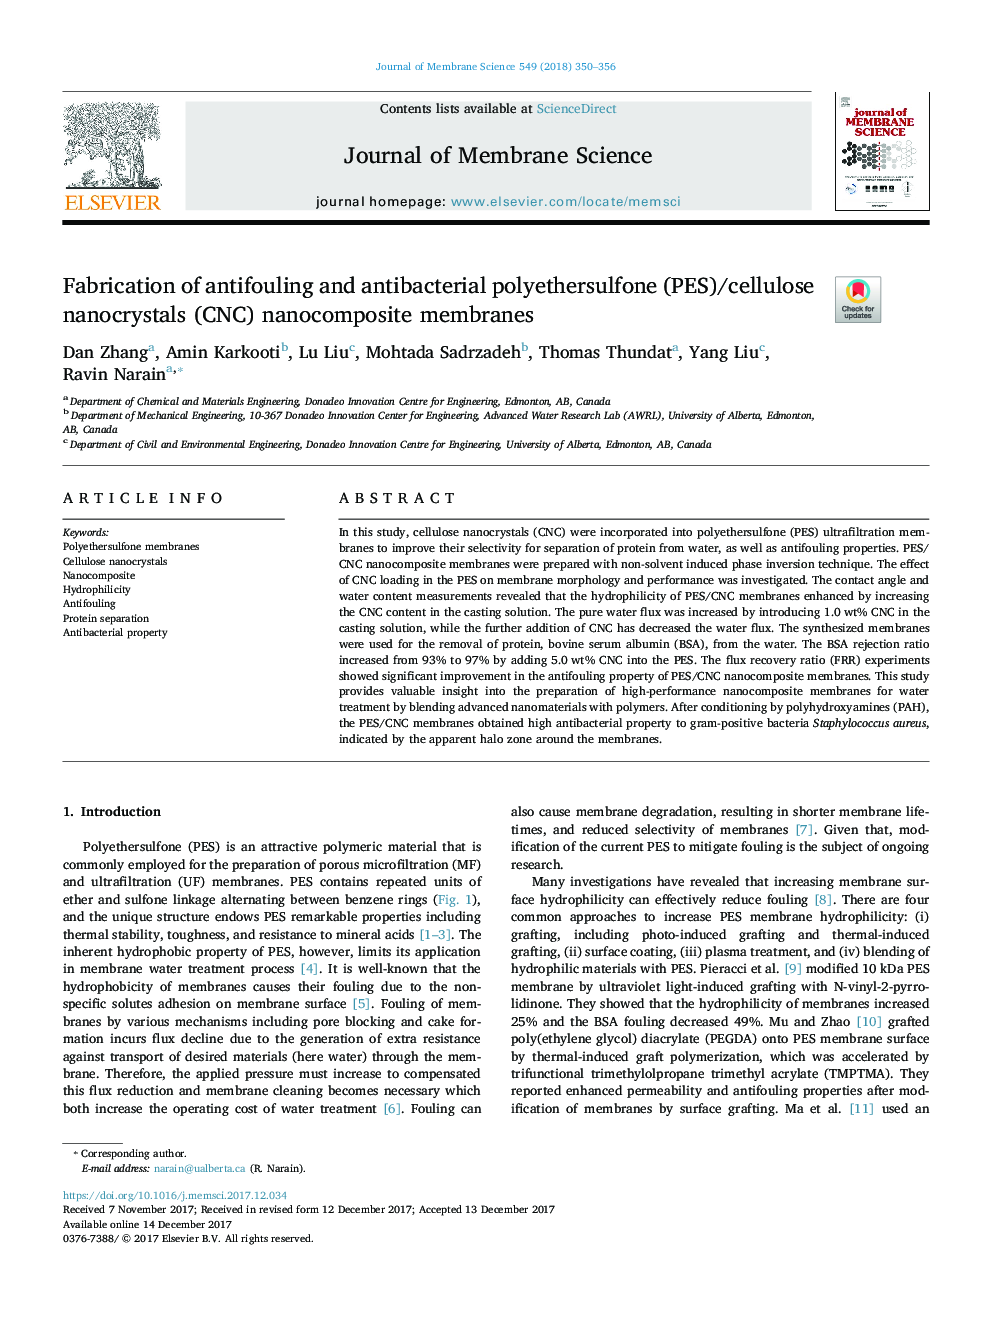 Fabrication of antifouling and antibacterial polyethersulfone (PES)/cellulose nanocrystals (CNC) nanocomposite membranes